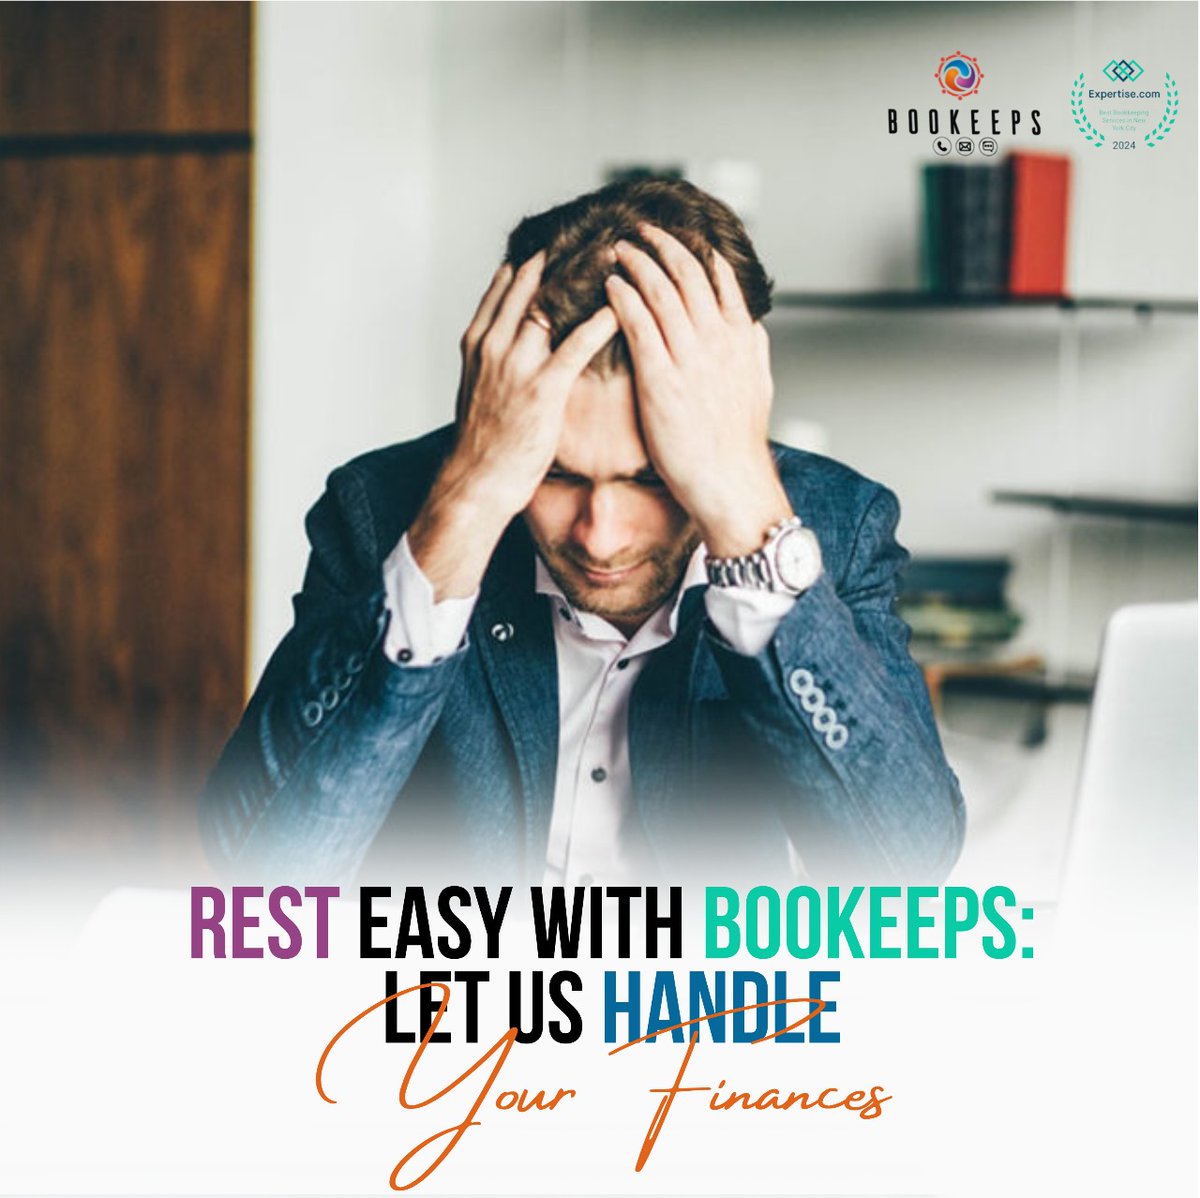 😓💸 Are your company's finances keeping you up at night? Get help from BOOKEEPS so you can focus on running your business. Call today at (212) 426-8642. 📞💼
--
👉 Contact us today!
🌐 bookeeps.com
📩 info@bookeeps.com
📞 212-426-8642

#FinancialStress